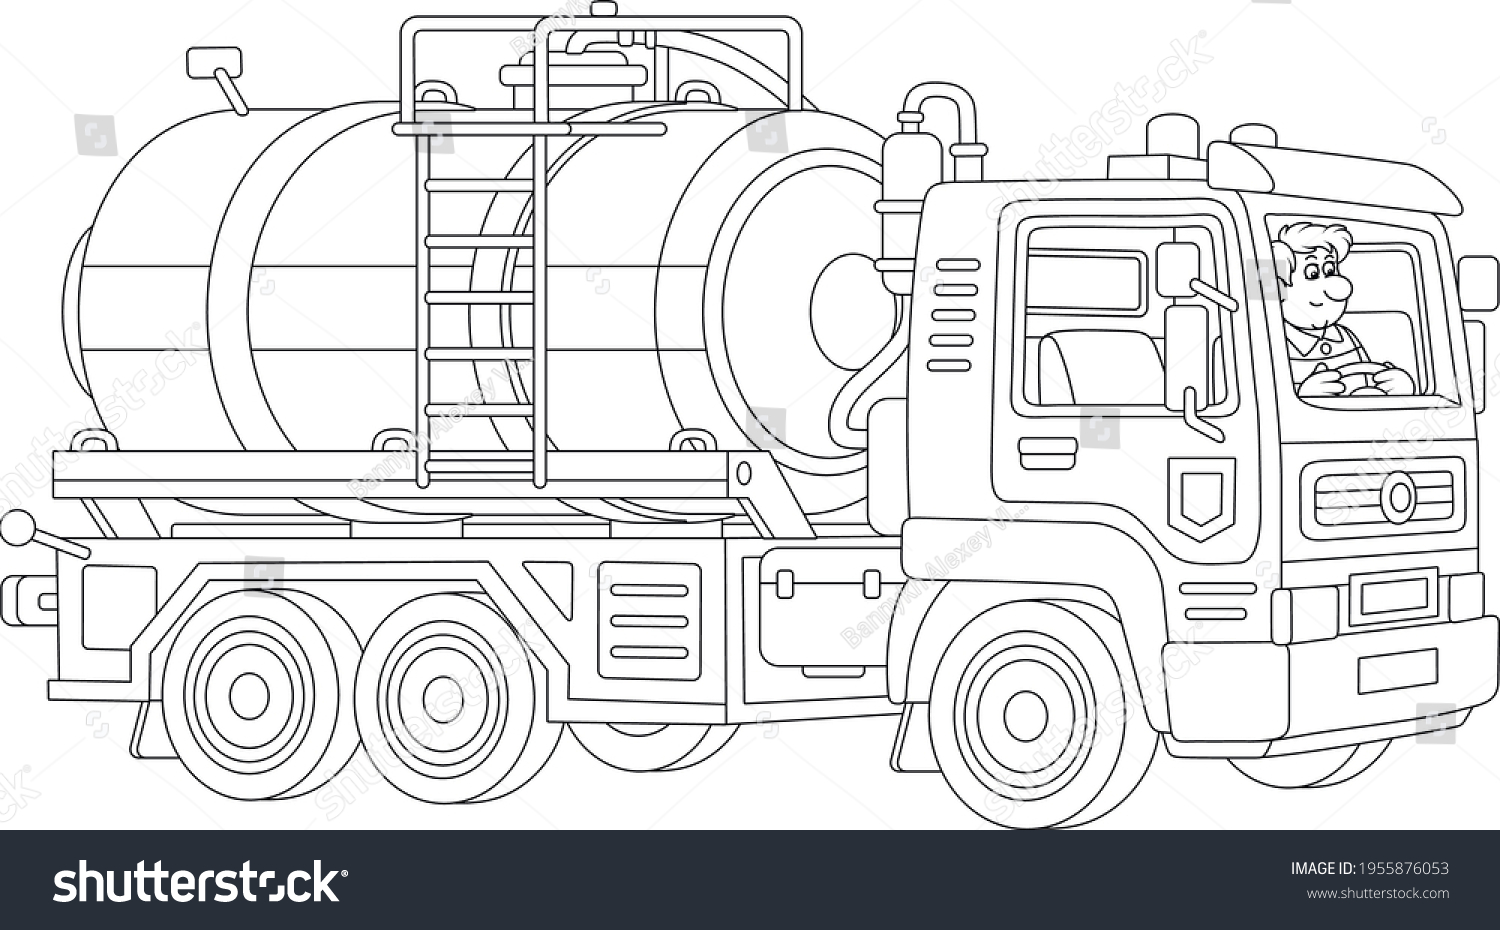 SVG of Toy gasoline auto tanker with a funny driver in service uniform, black and white outline vector cartoon illustration for a coloring book page svg